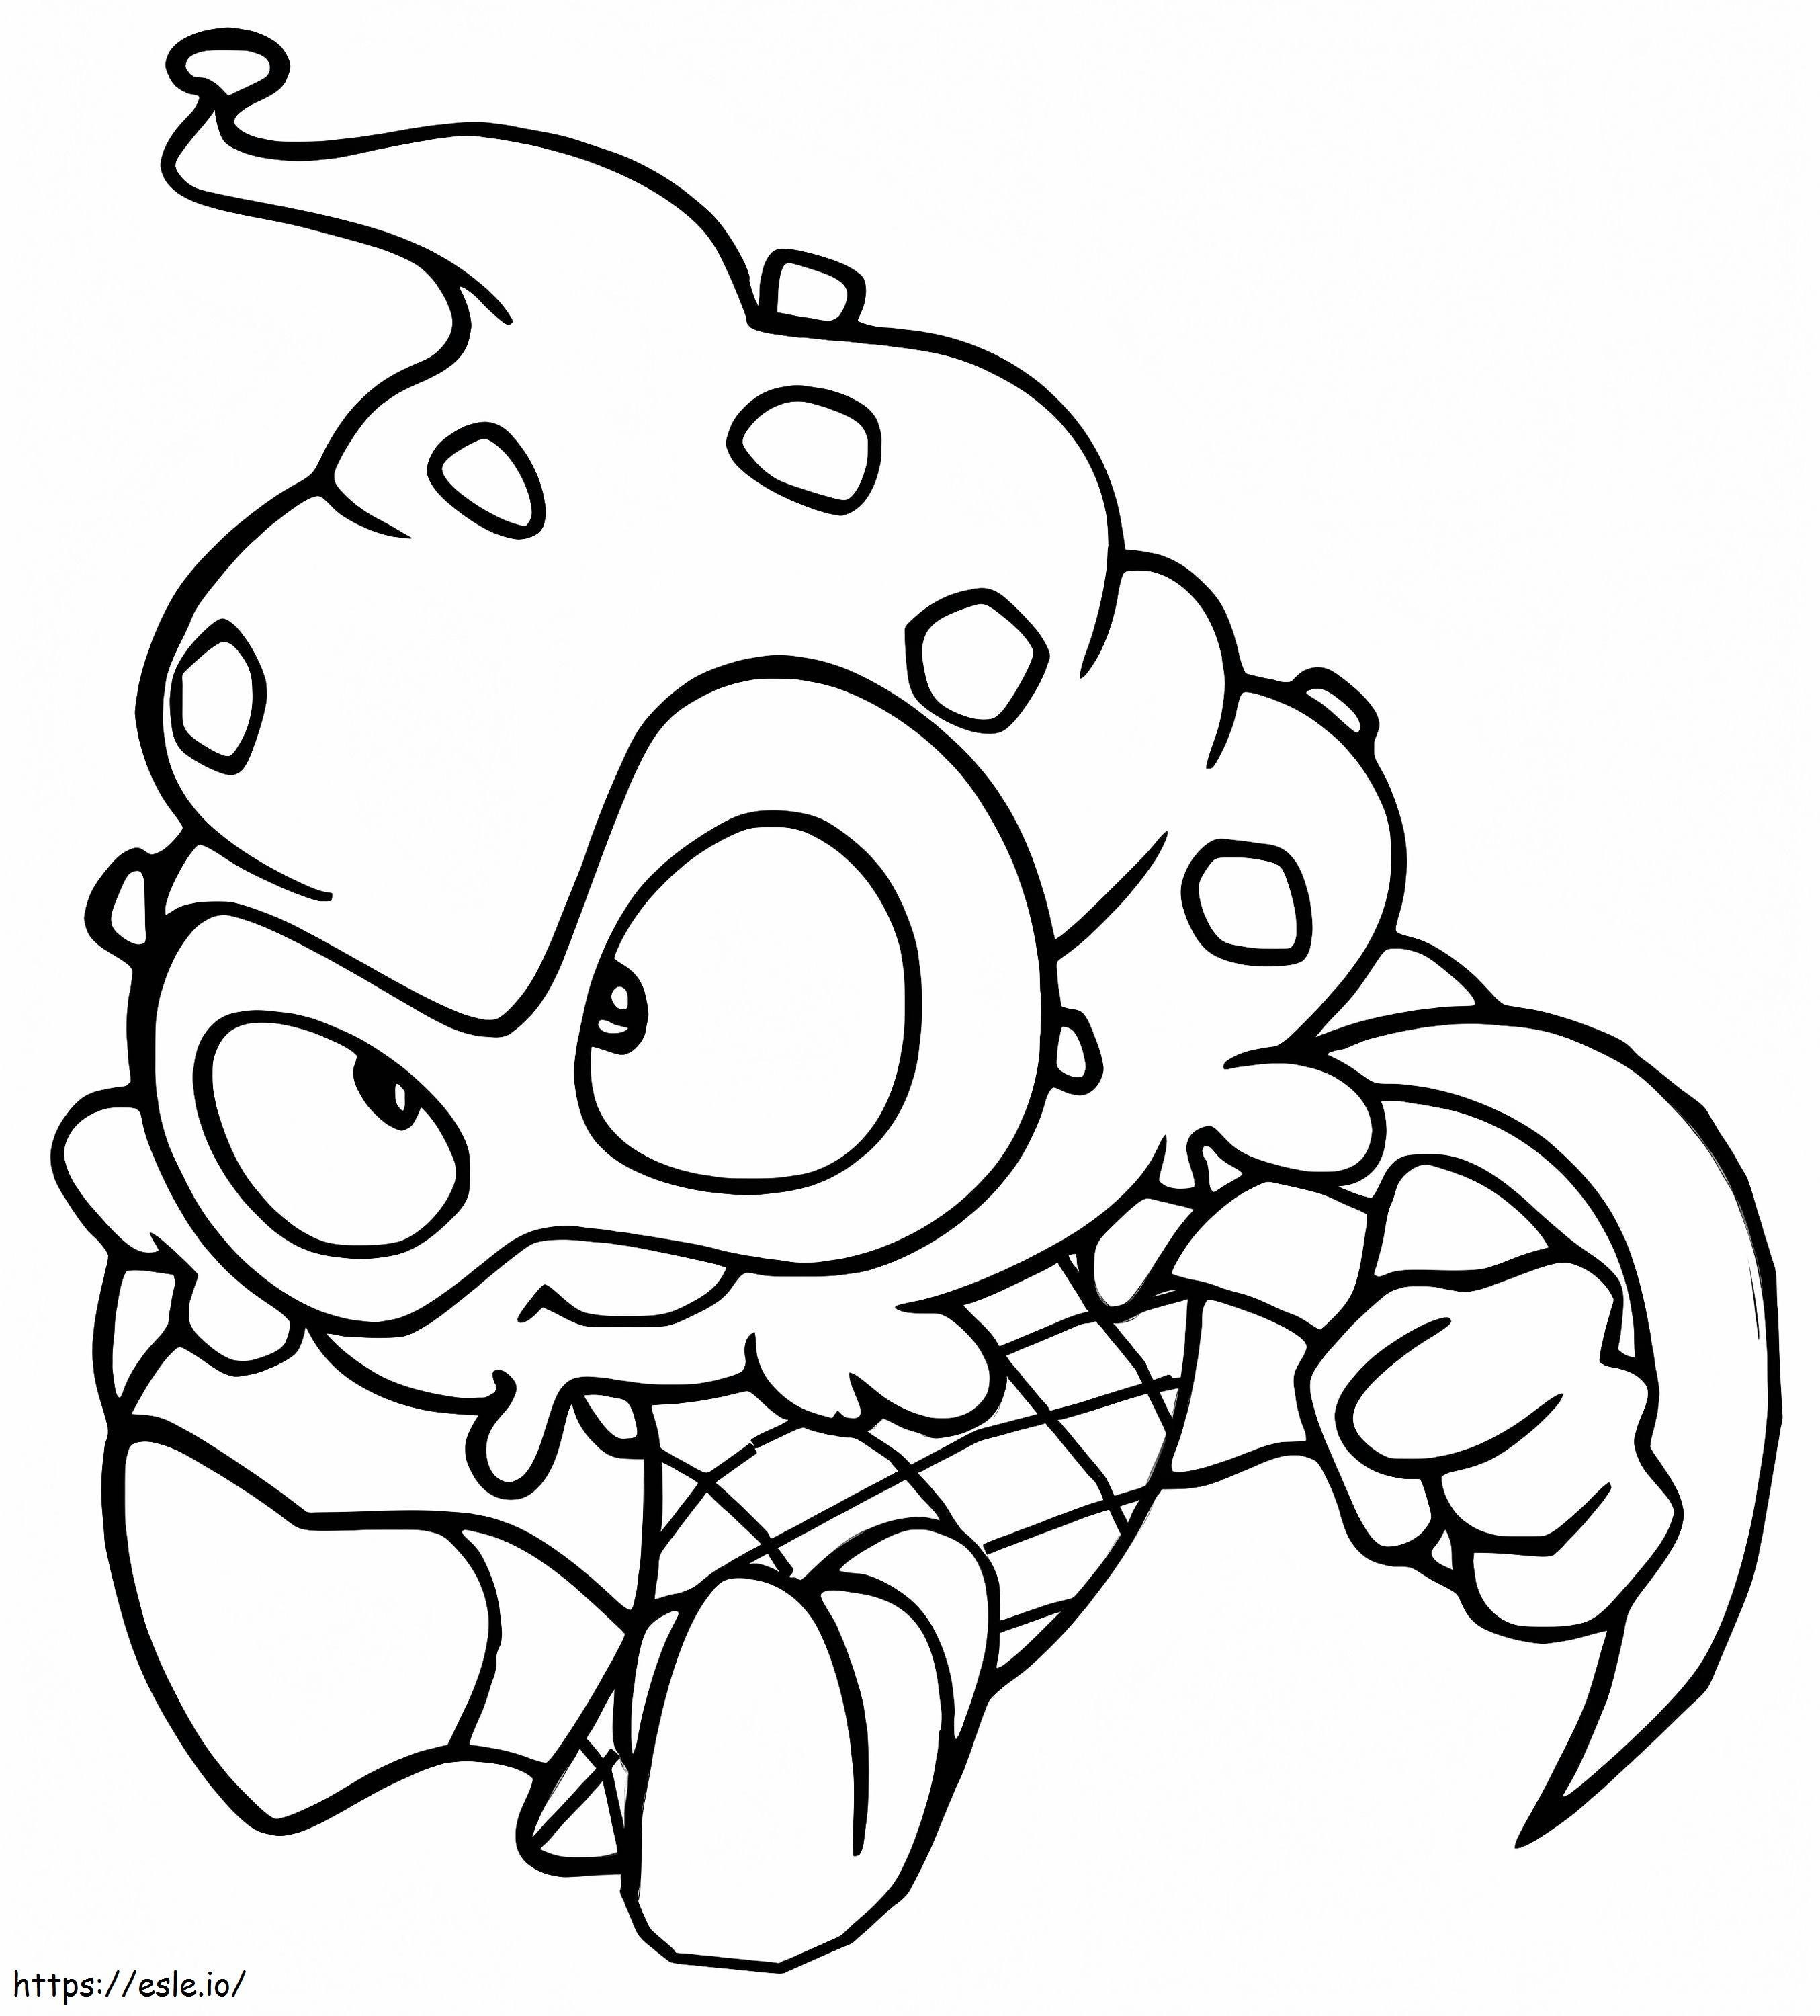 Coolizer Superzings coloring page